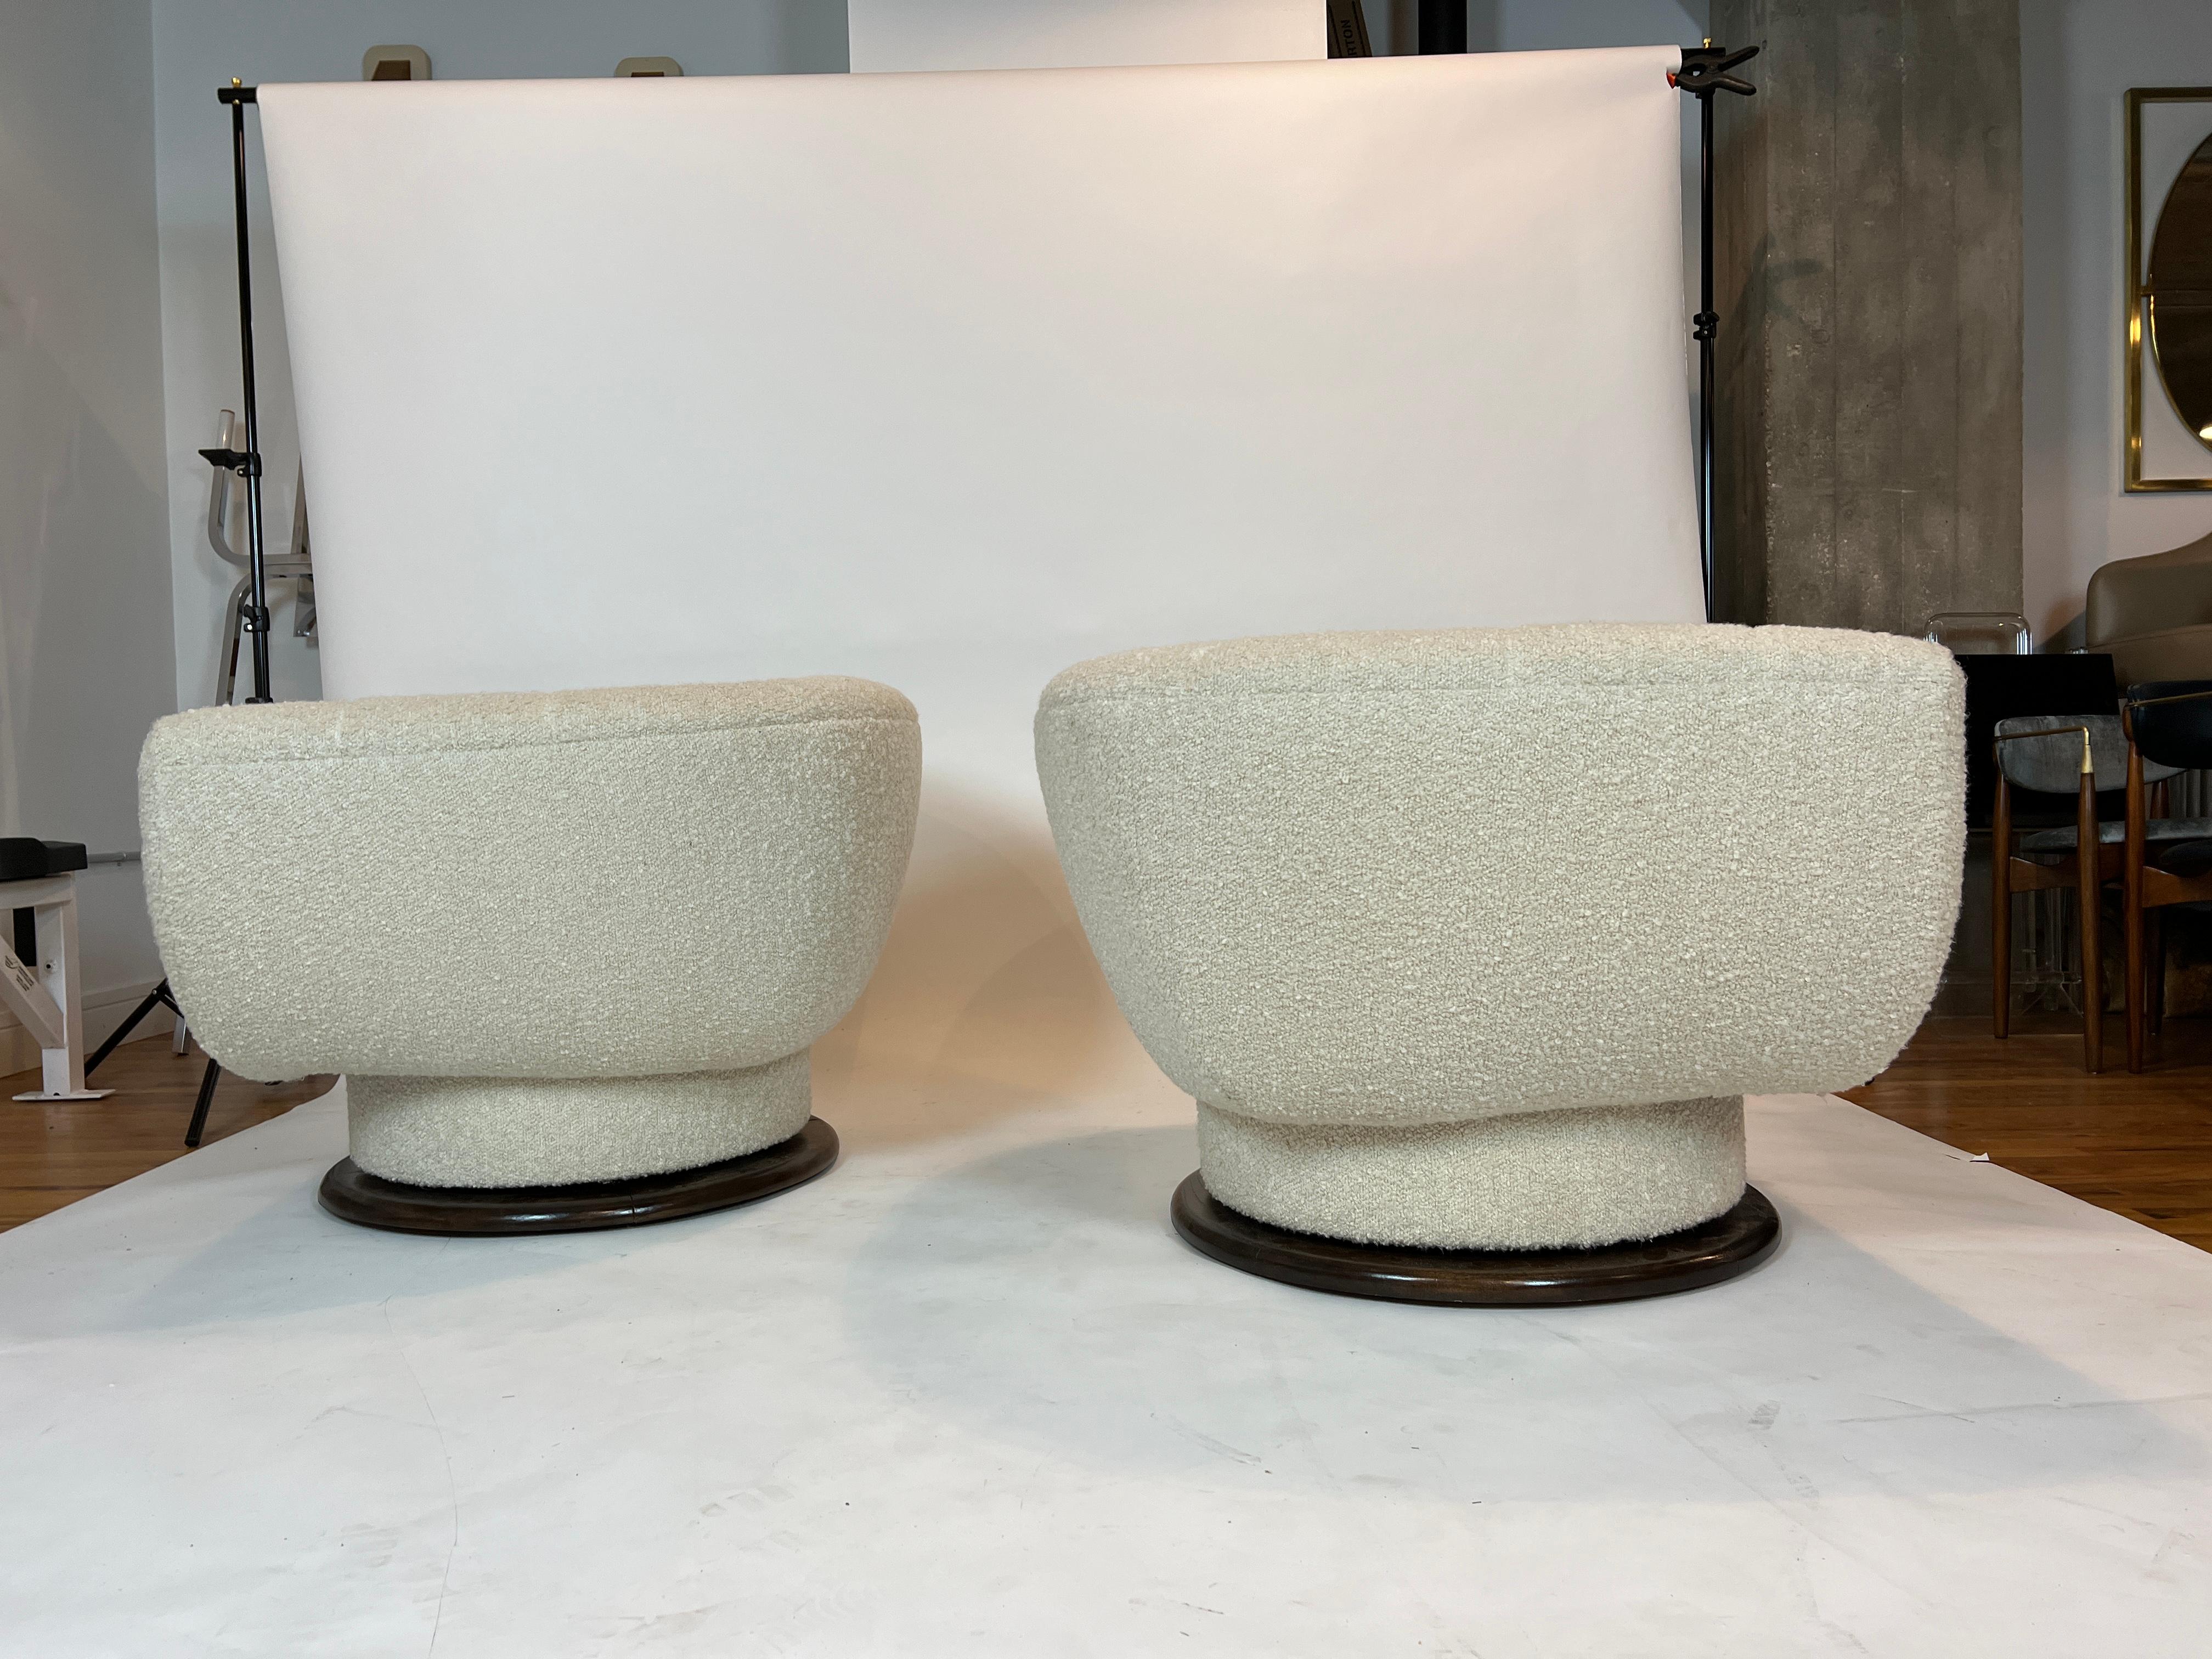 Very rare pair of barrel swivel chairs attributed to Adrain Pearsall for Craft Associates, 1960’s. Each chair swivels 360 degrees and have been restored and reupholstered in an ivory boucle. The wood base has been restored in a dark walnut finish.